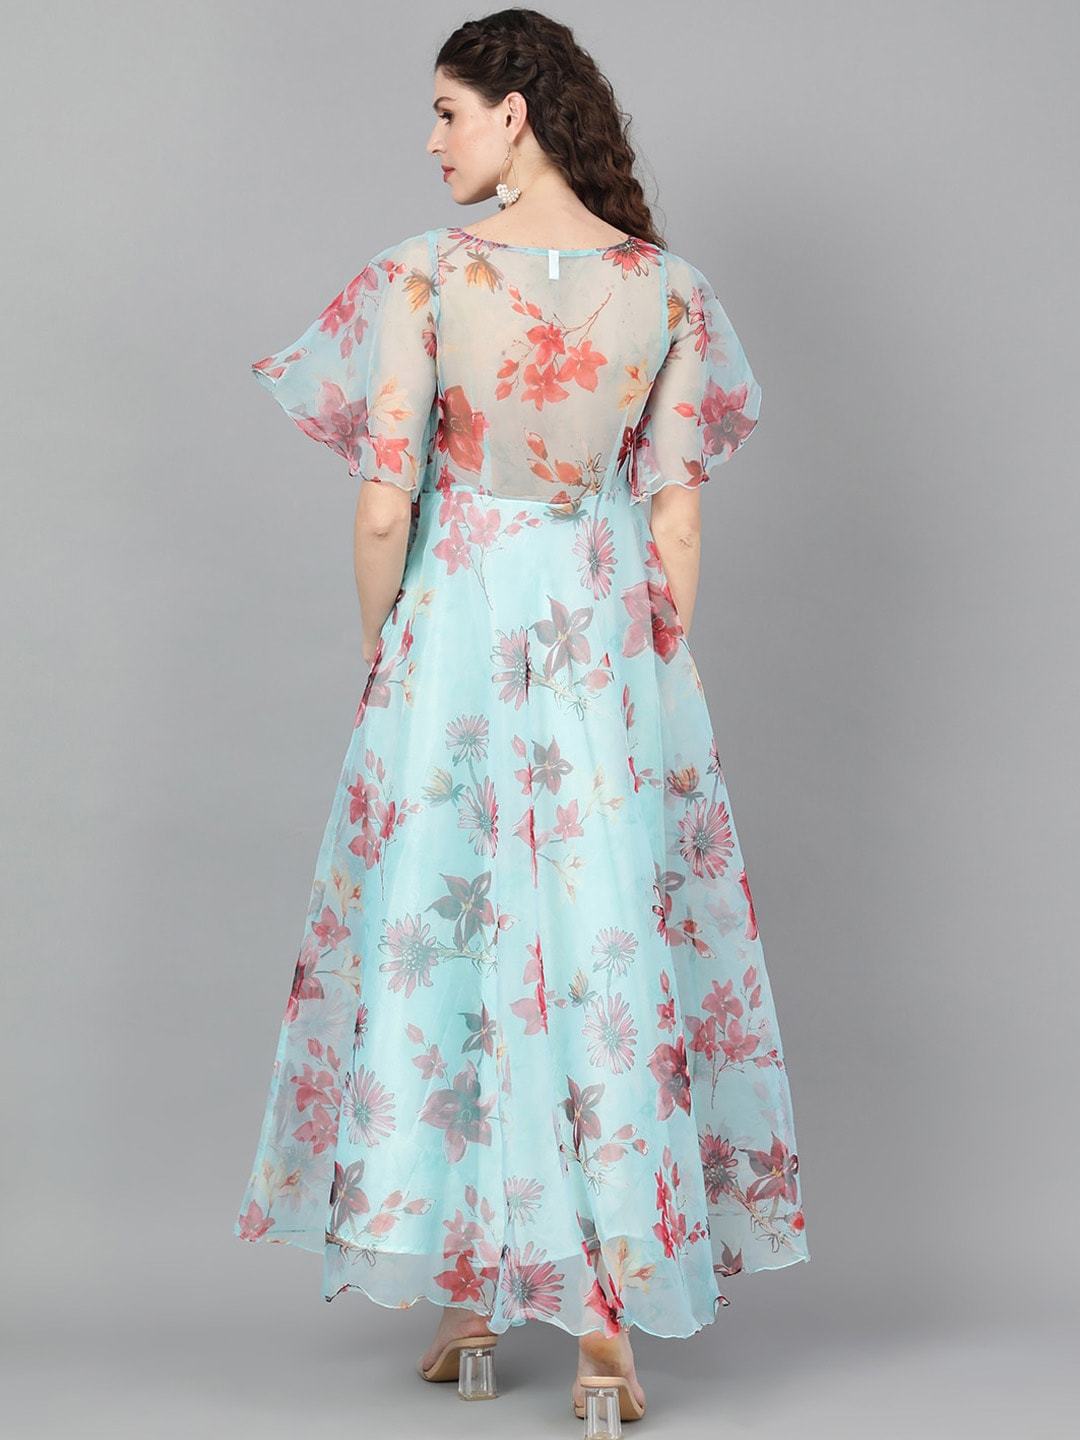 Women's  Turquoise Blue & Pink Floral Printed Maxi Dress - AKS